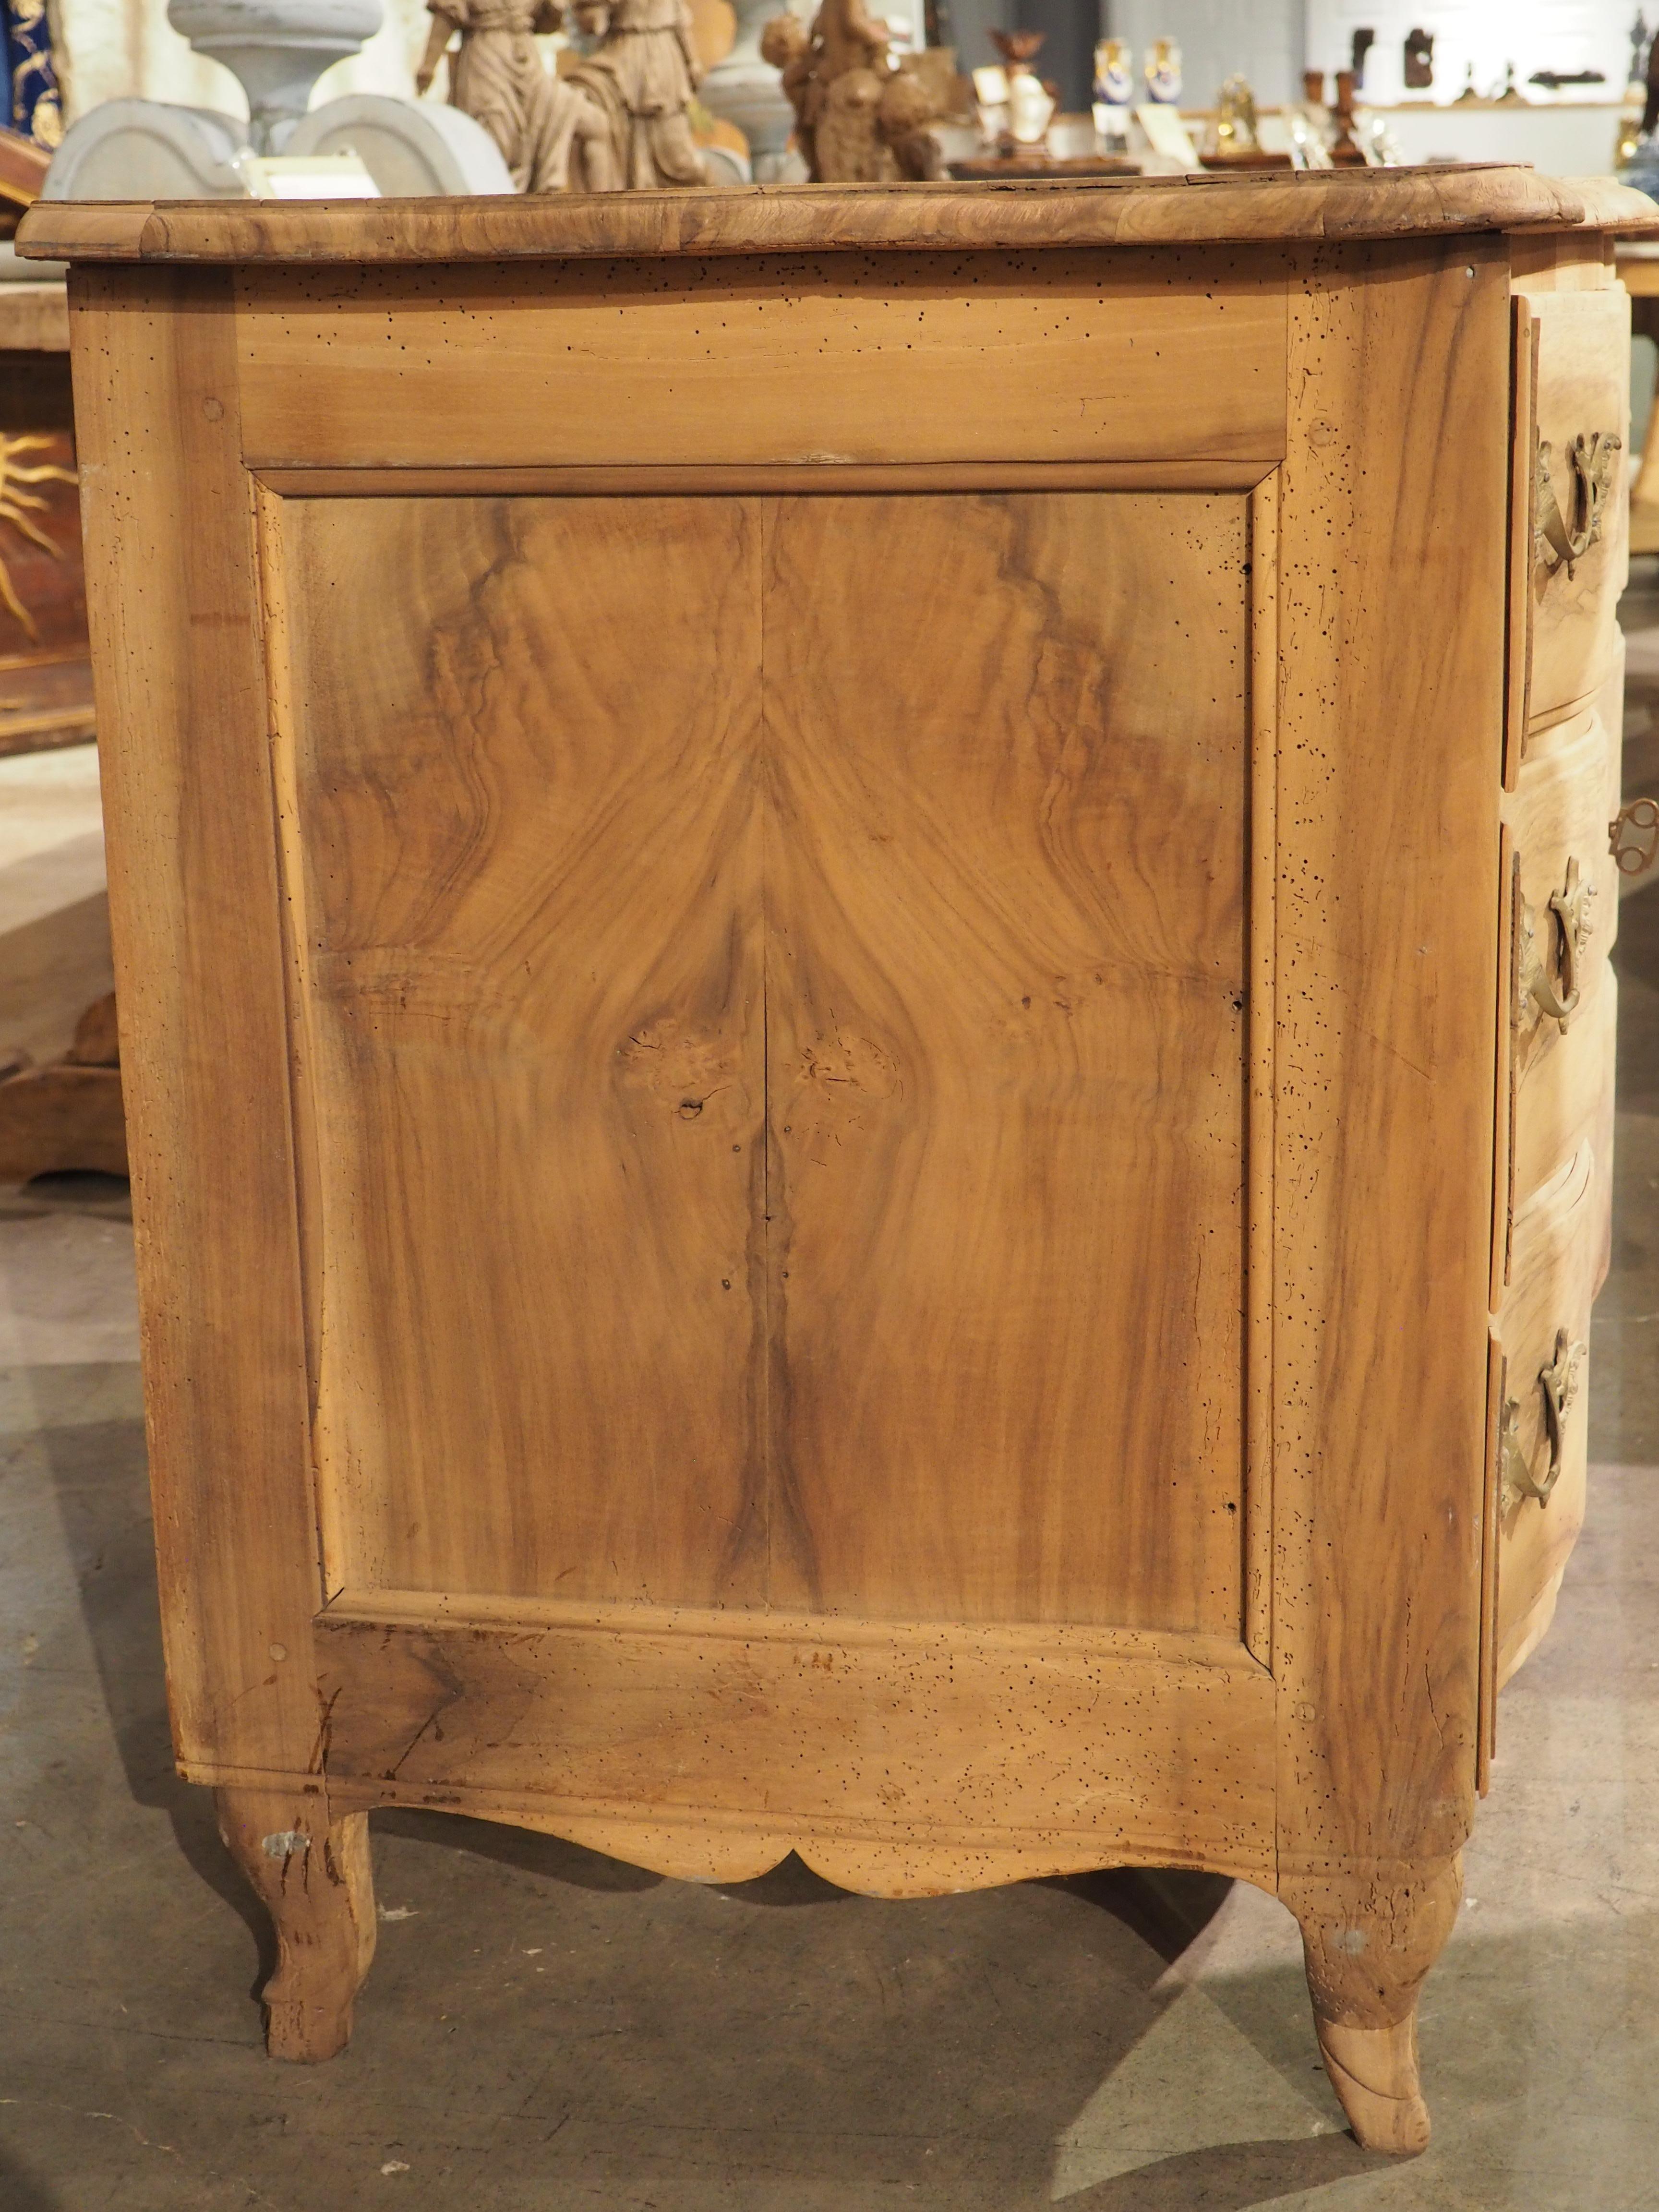 Hand-Carved 18th Century French Commode Arbalete in Bleached Burl Walnut